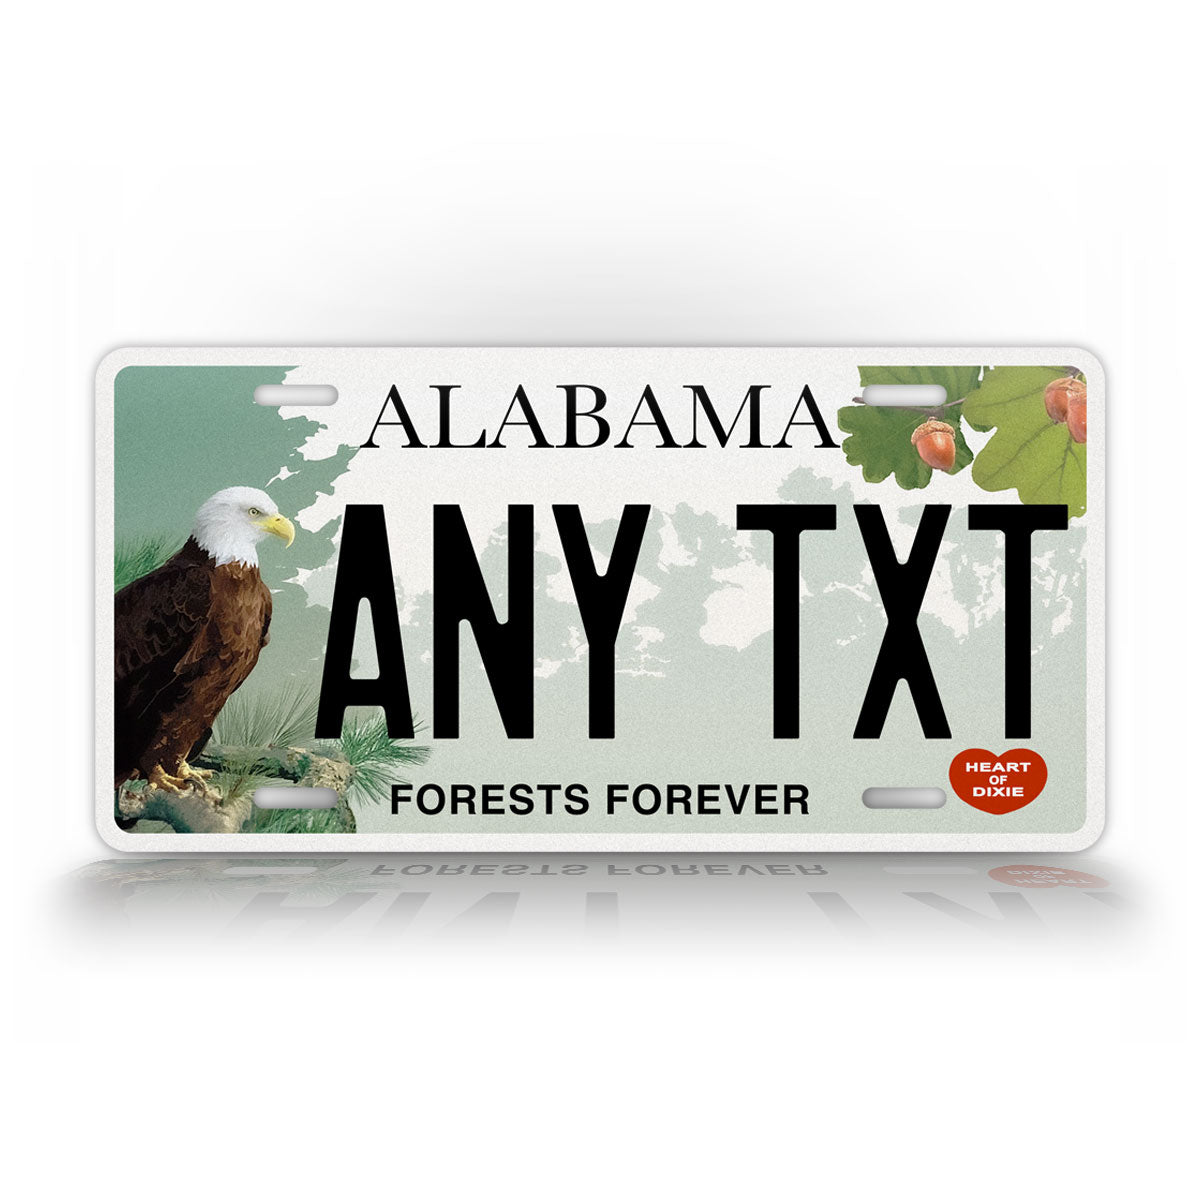 Custom Alabama Forests forever Bald Eagle Personalized License Plate